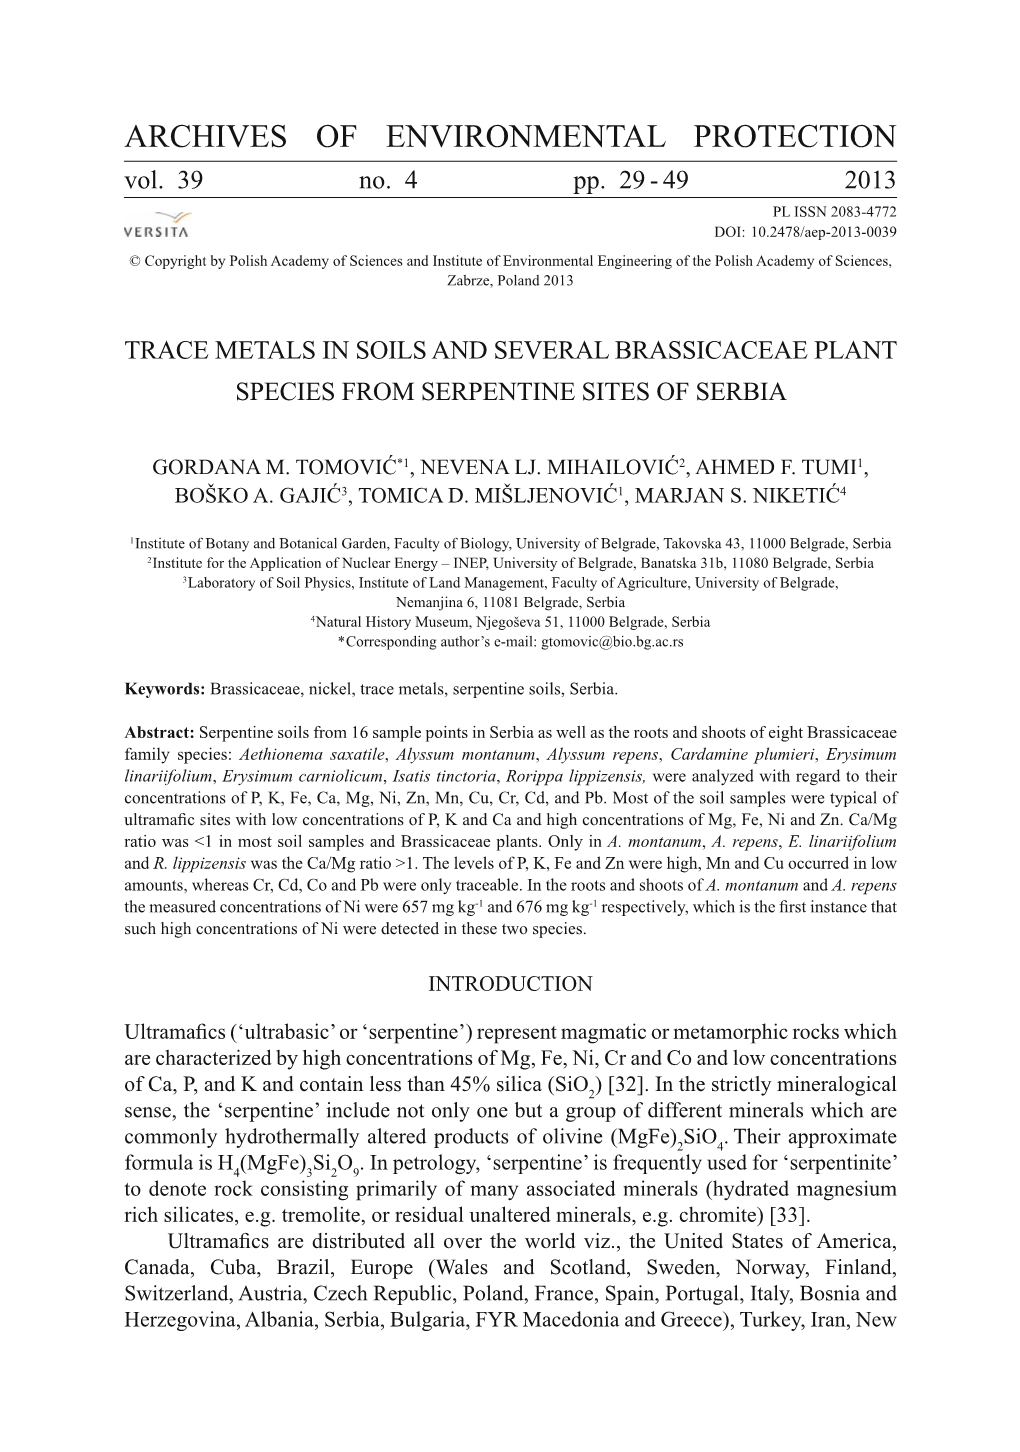 Trace Metals in Soils and Several Brassicaceae Plant Species from Serpentine Sites of Serbia